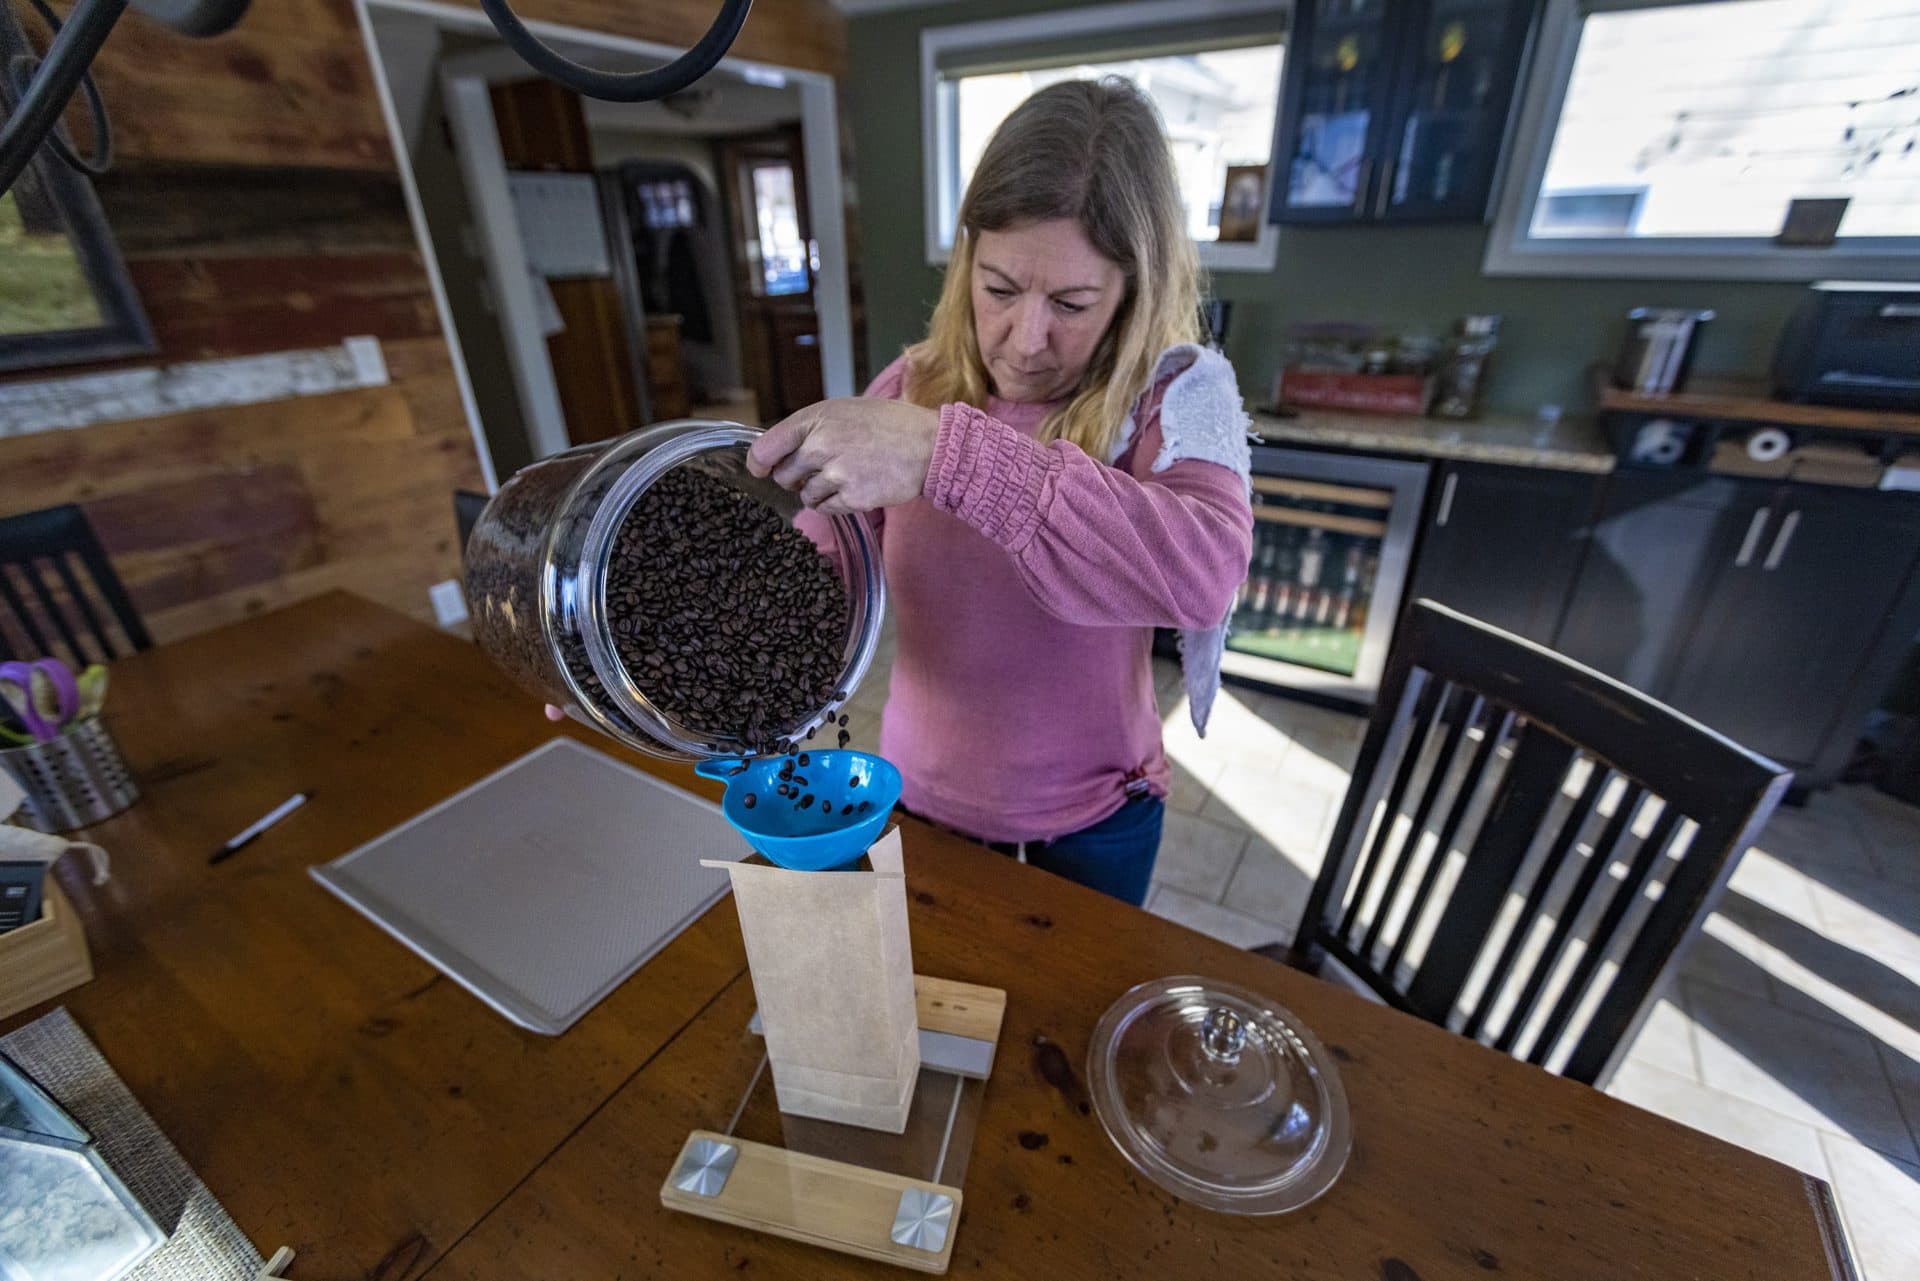 Amy Smith pours freshly roasted coffee into a bag at her home business My Coffeesmiths in Pembroke. (Jesse Costa/WBUR)